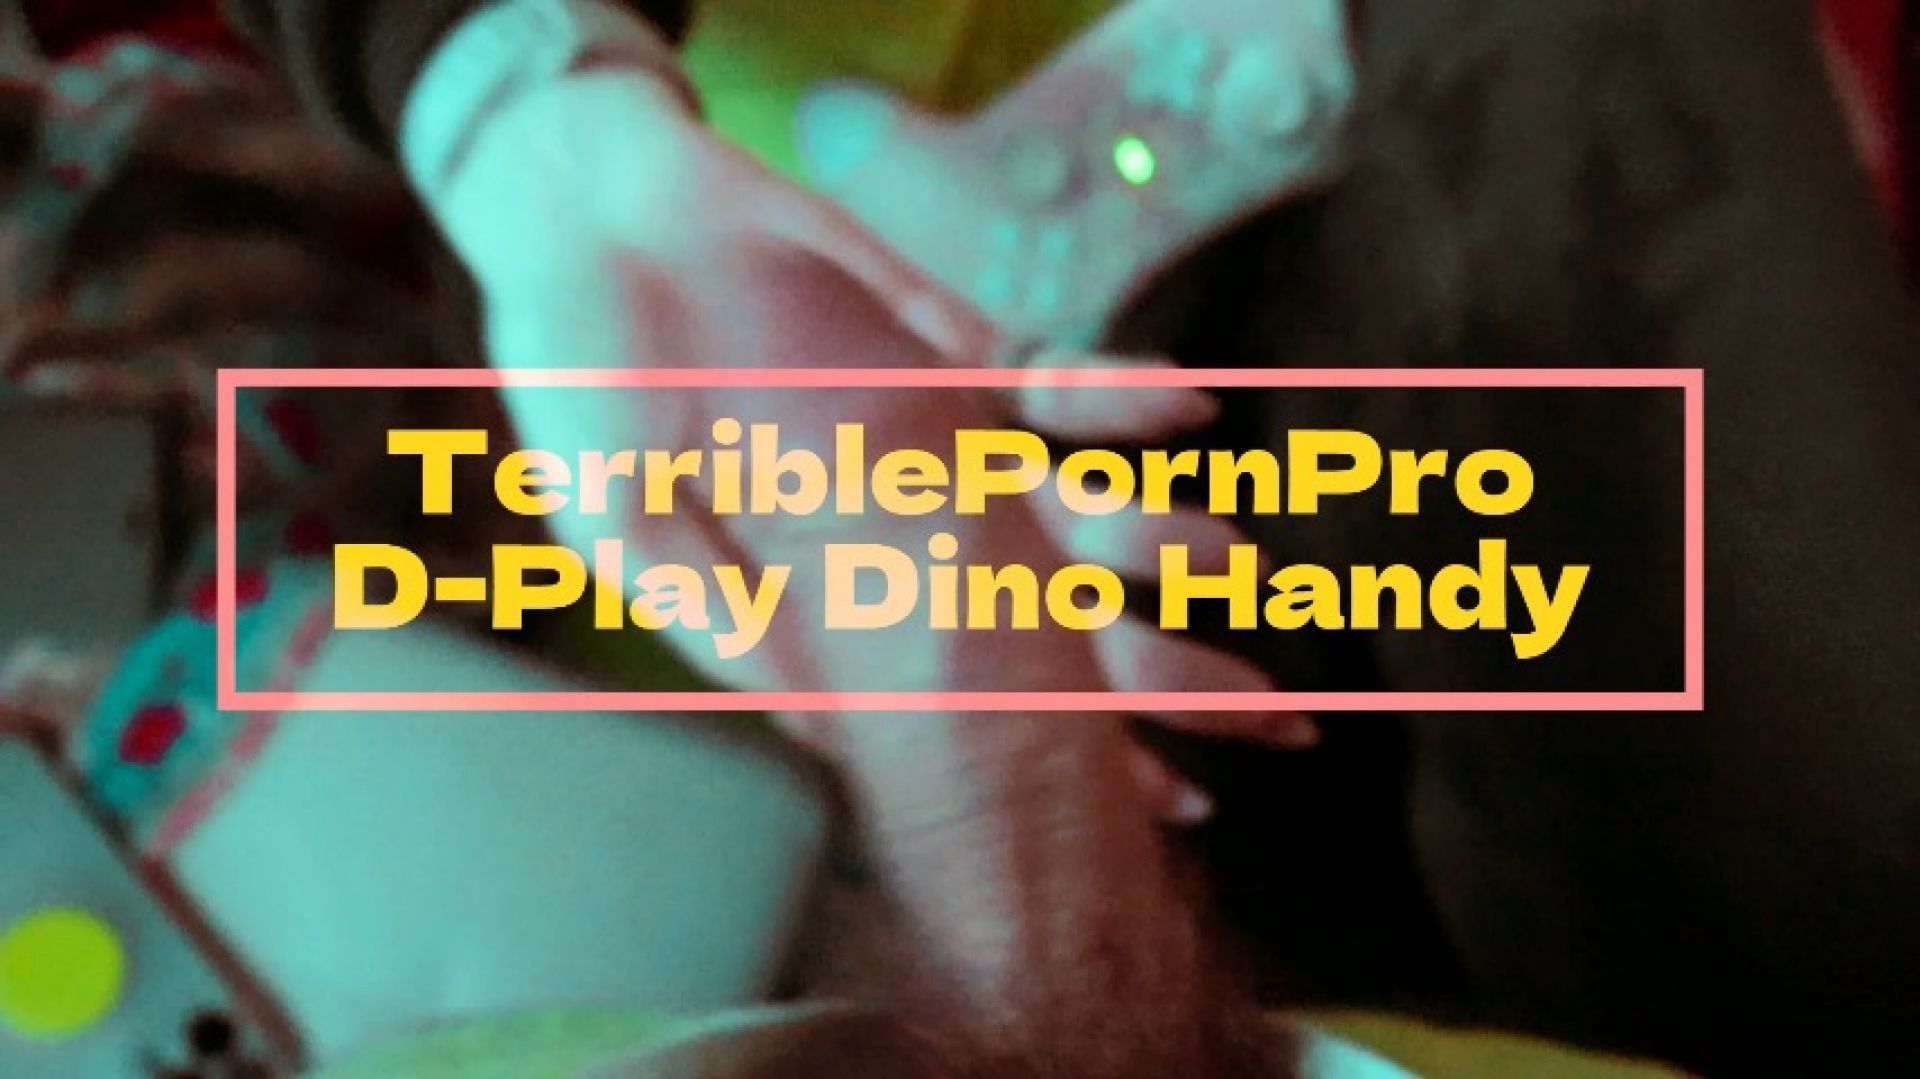 D-Play Dino Handy by TerriblePornPro